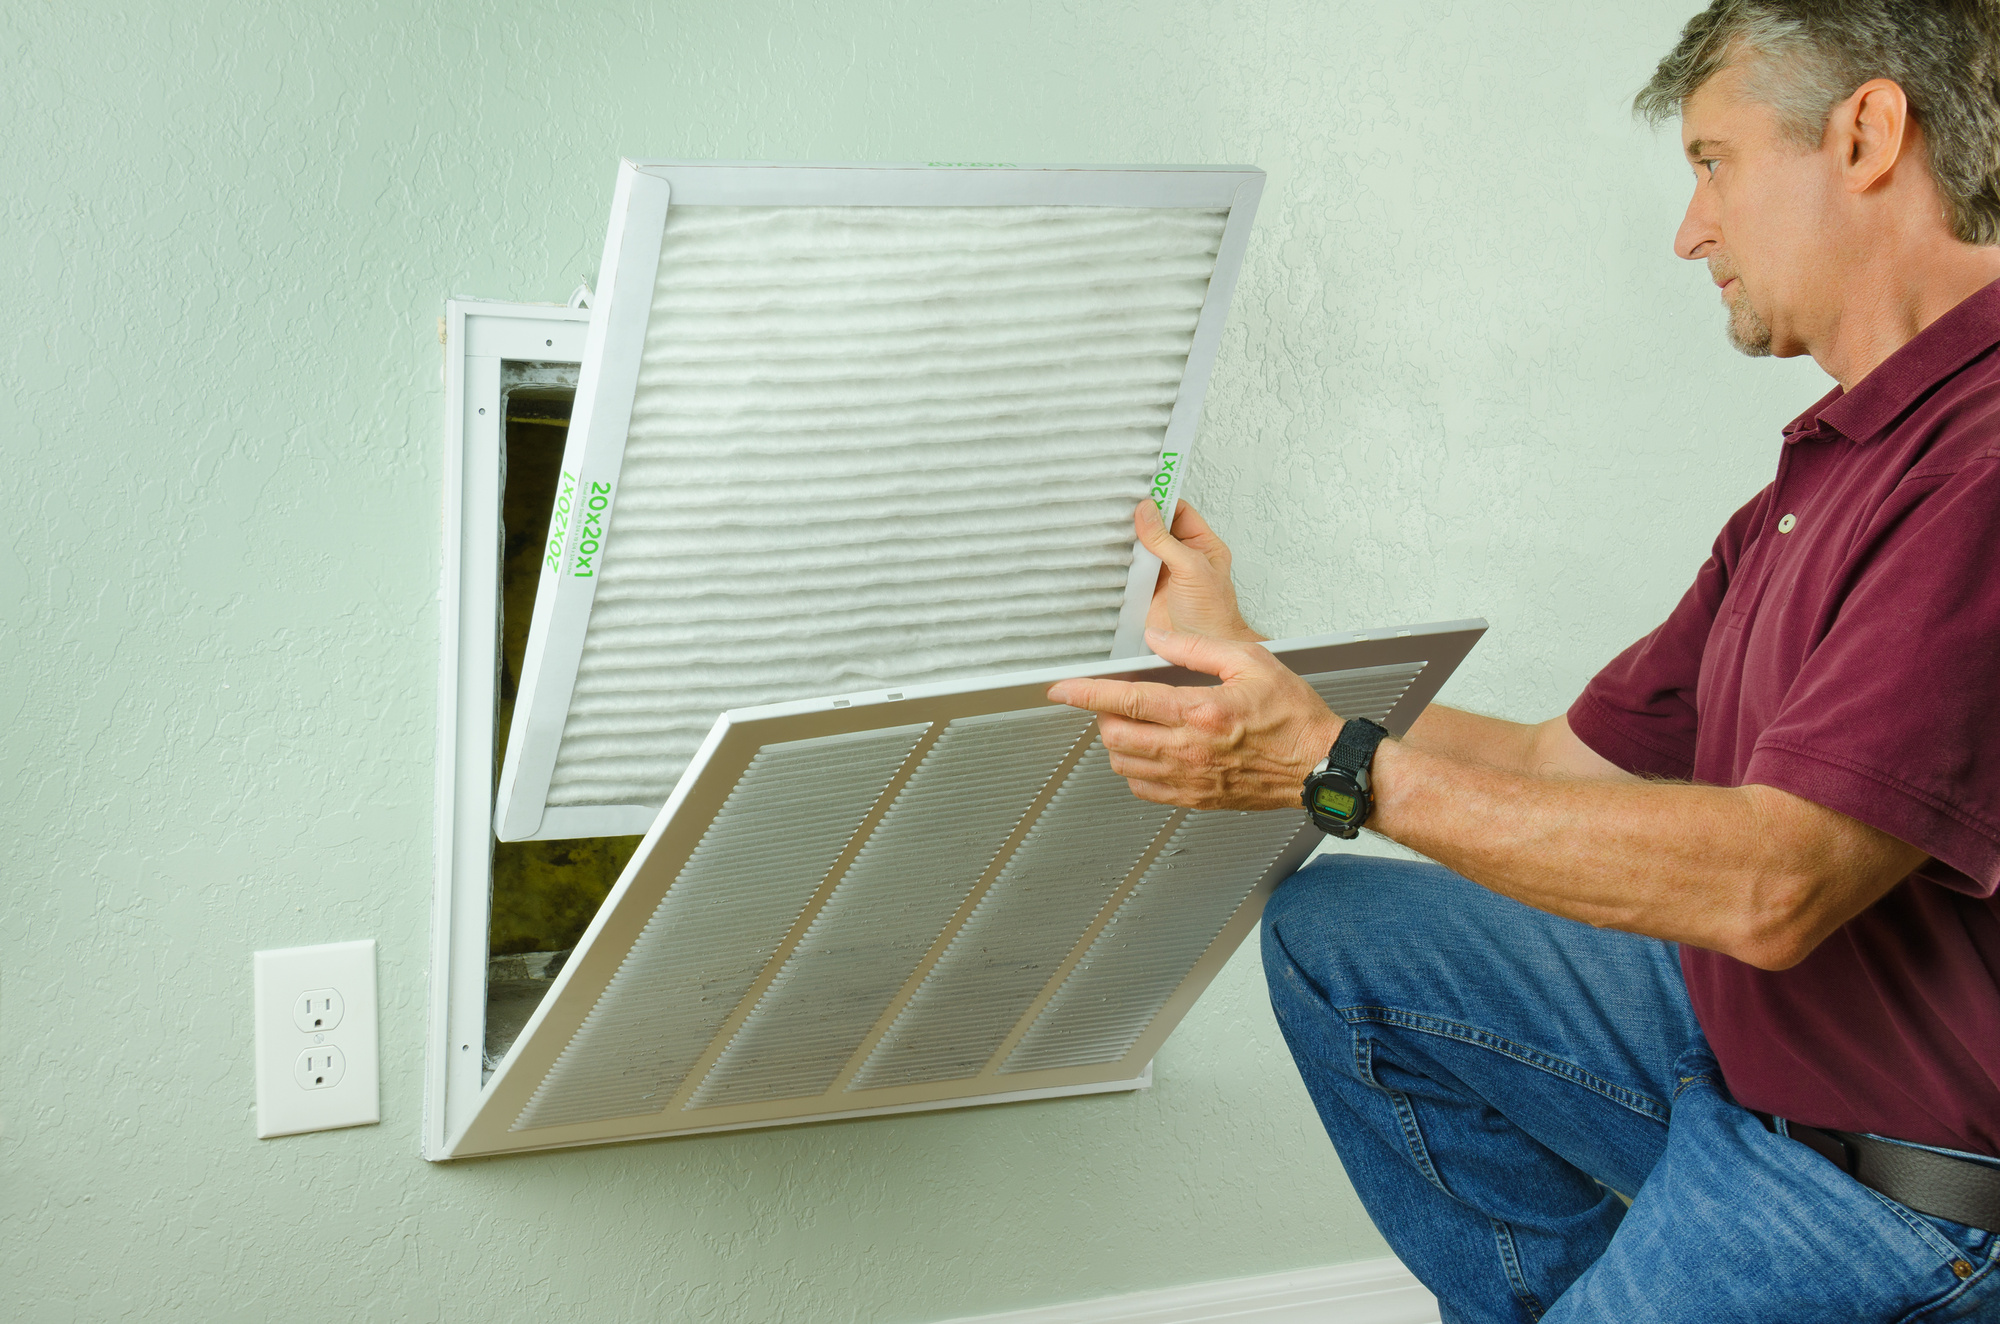 7 Ways to Find Fall Maintenance Agreements for HVAC